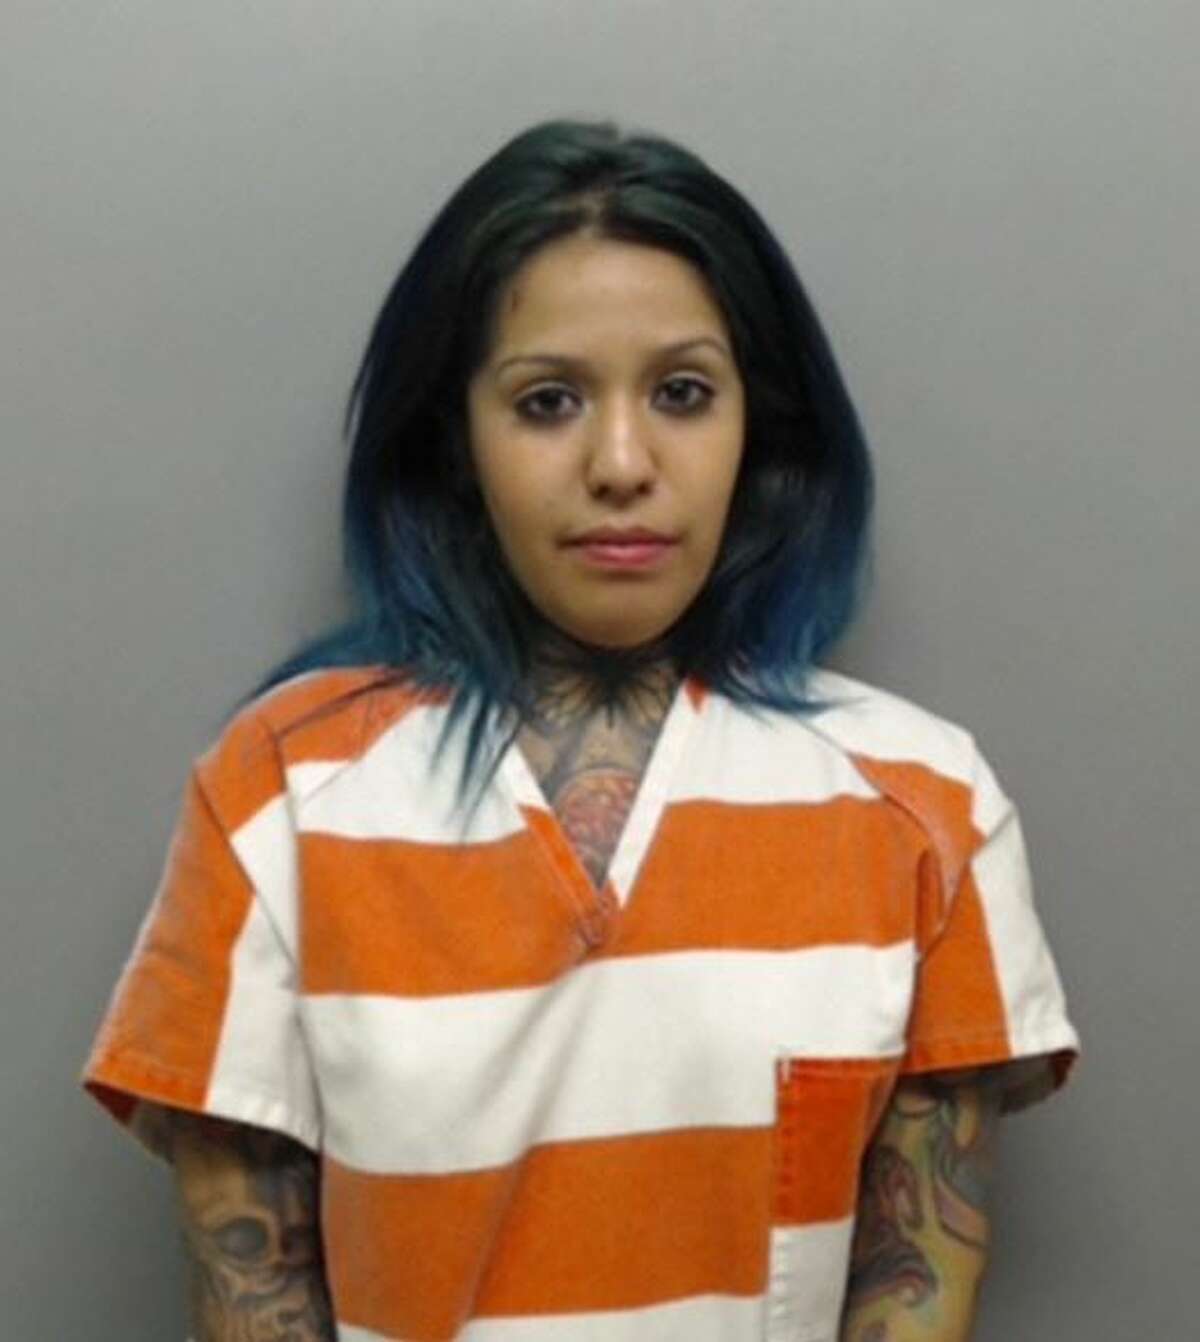 Keisha Guzman, 20, was arrested and charged with possession of a controlled substance.